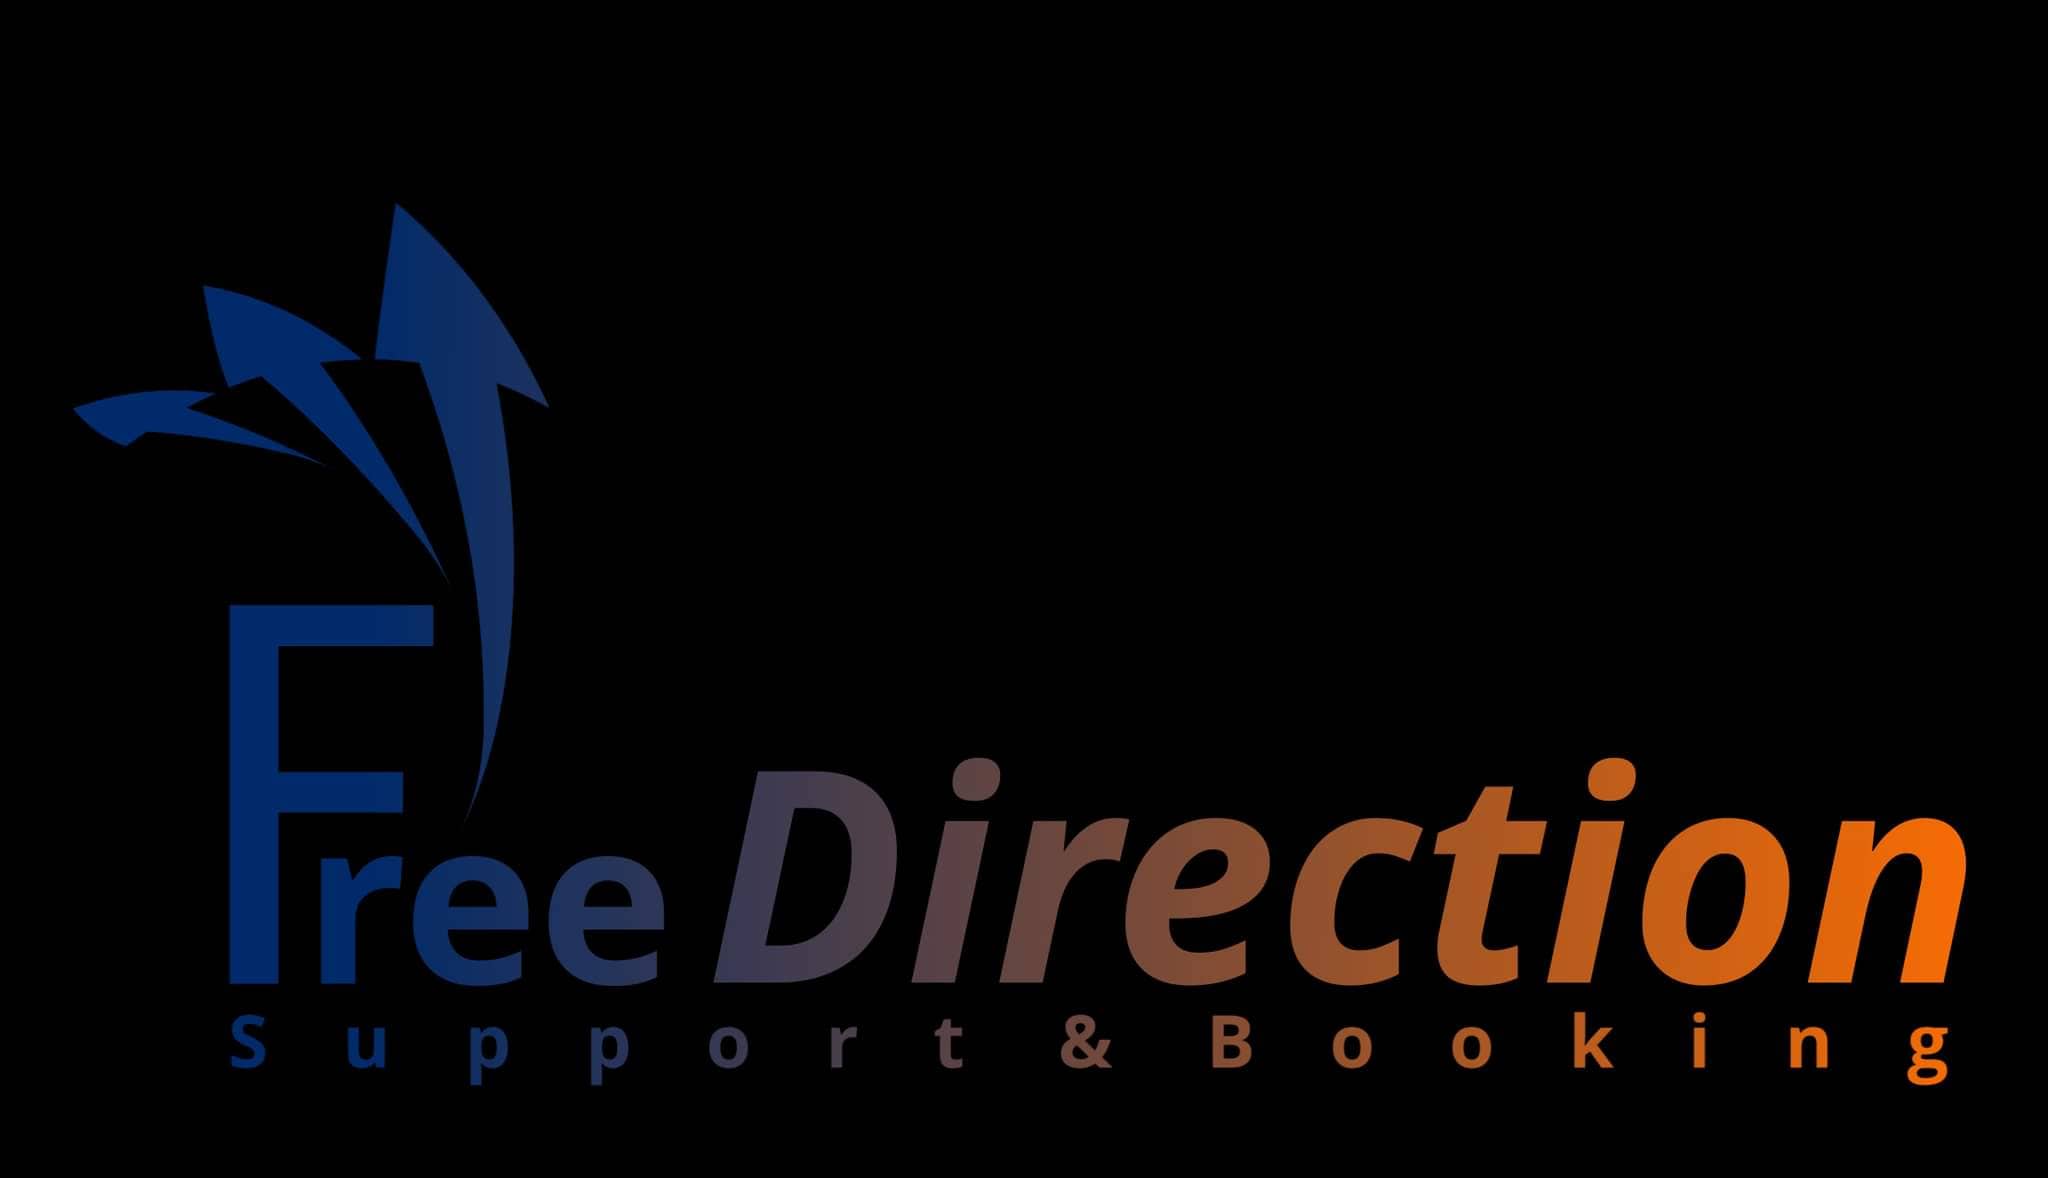 Free Direction Support & Booking